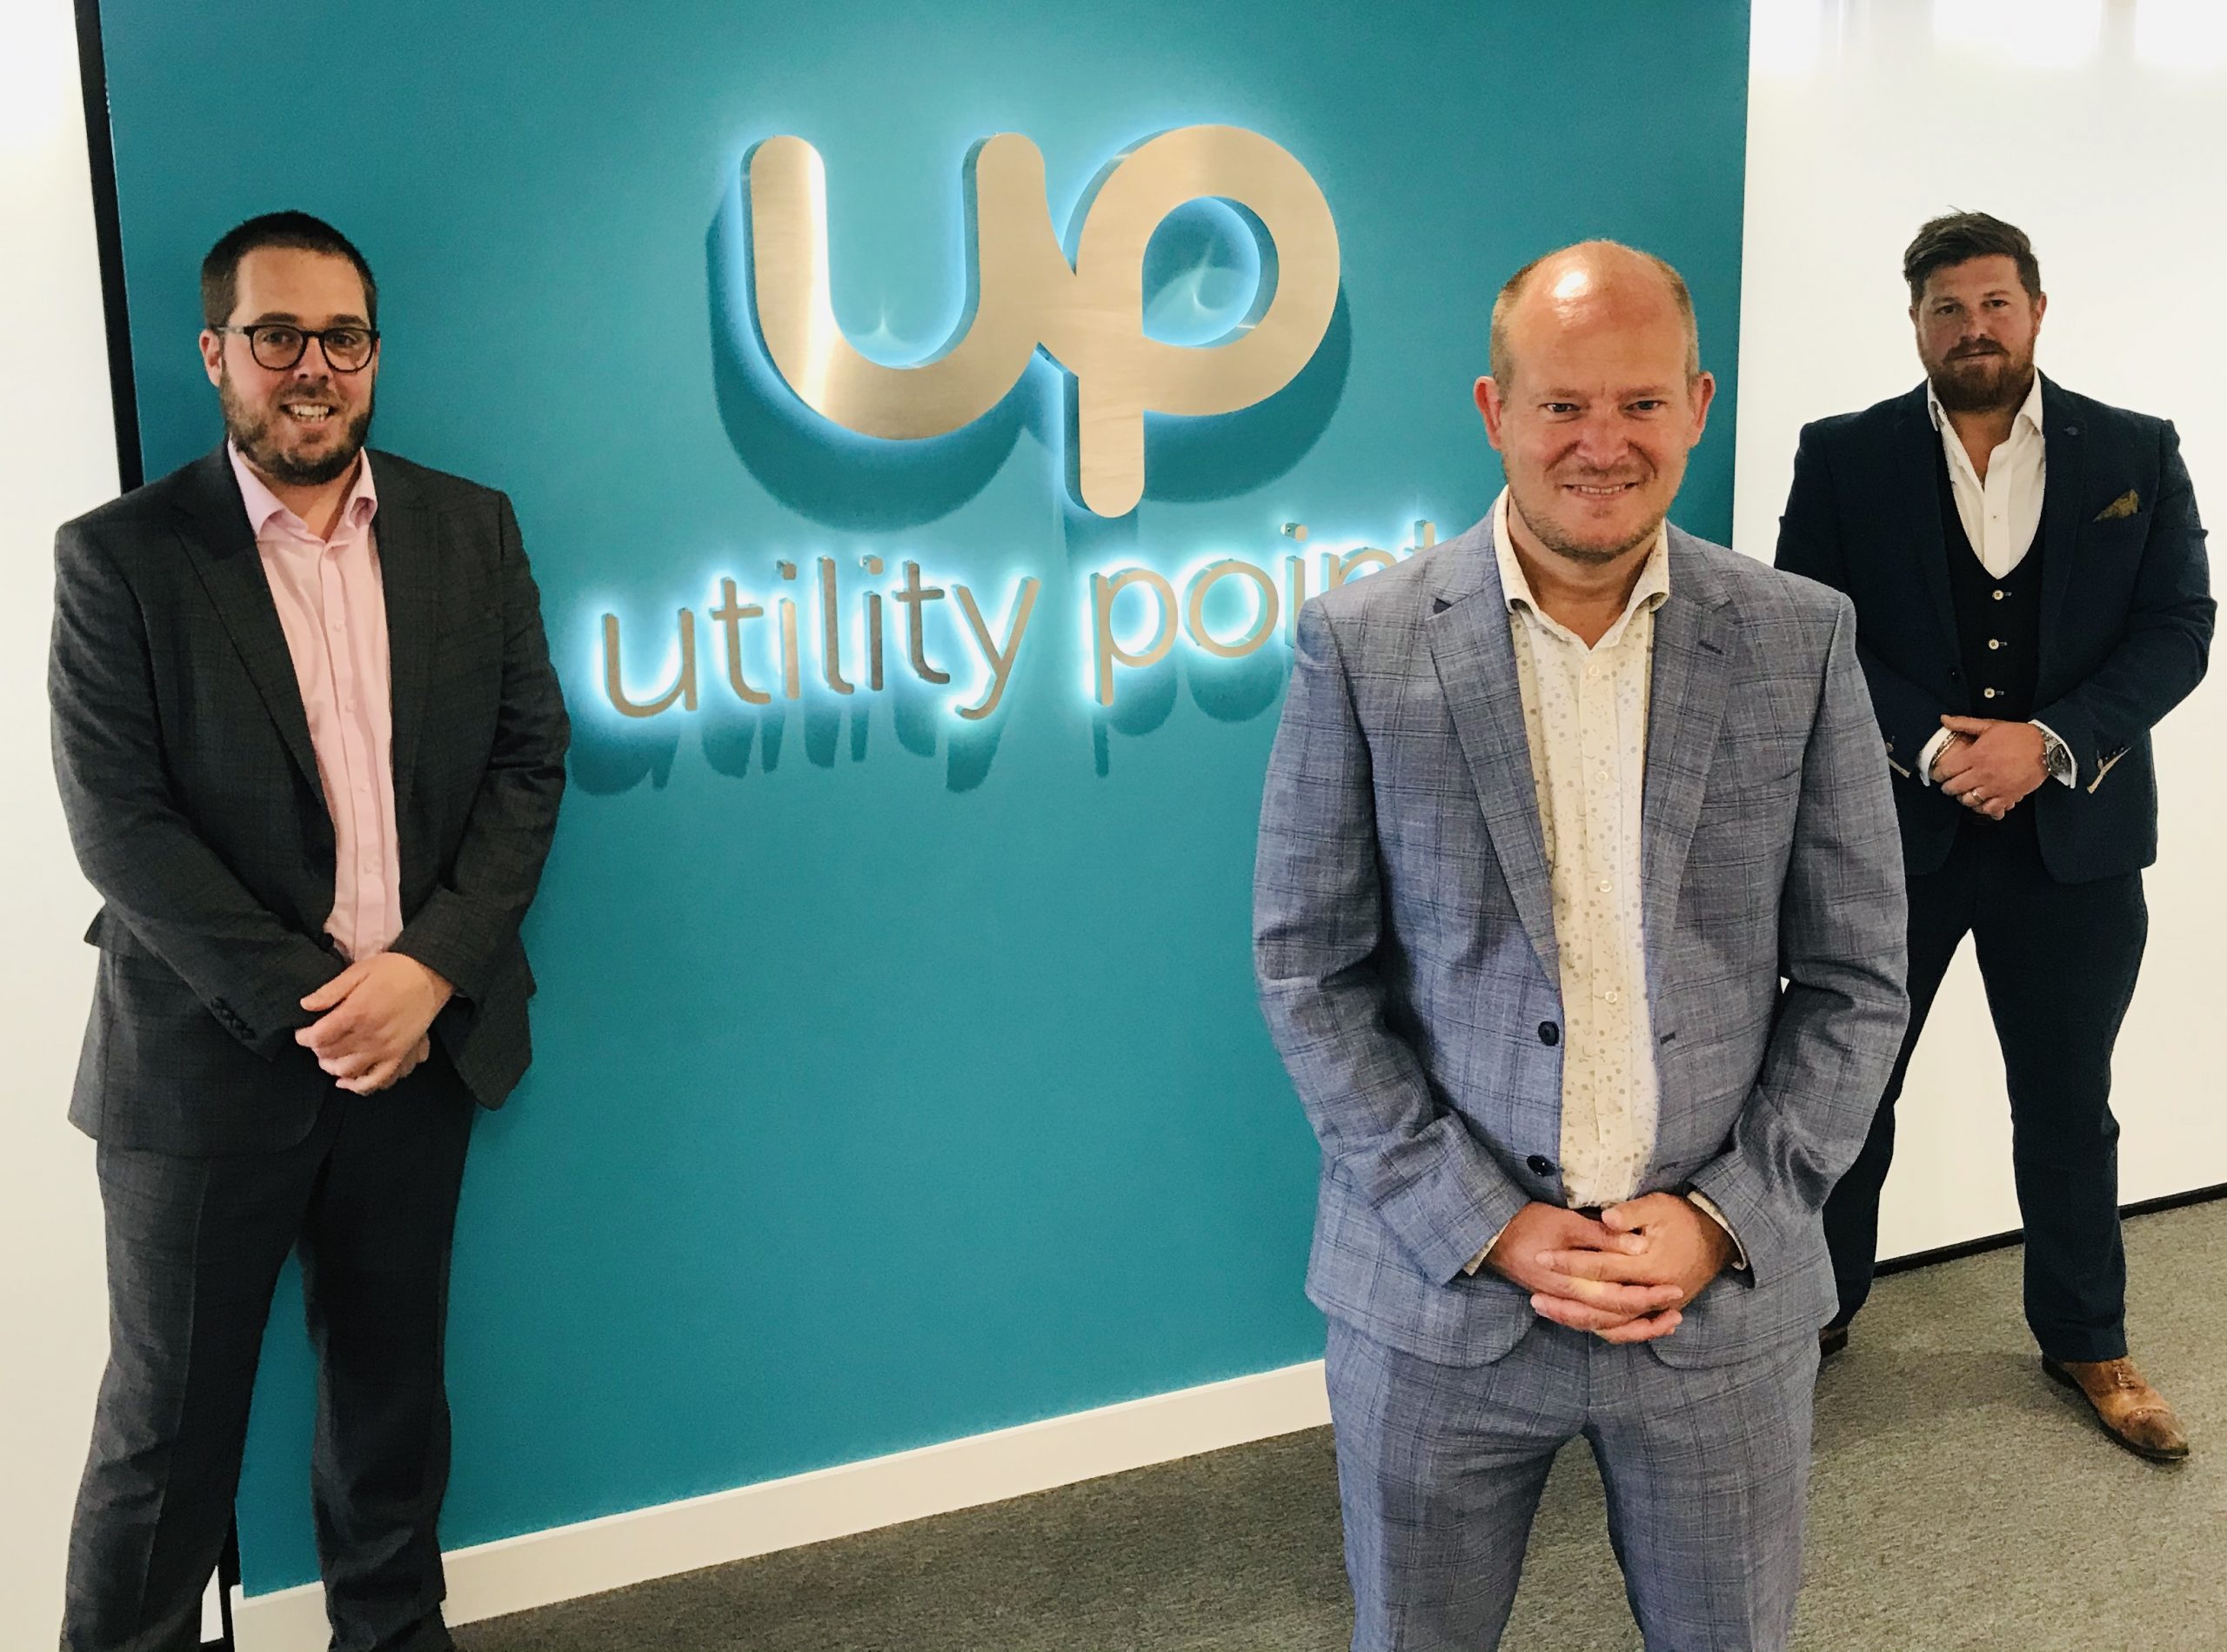 Saffery Champness win Utility Point as a client